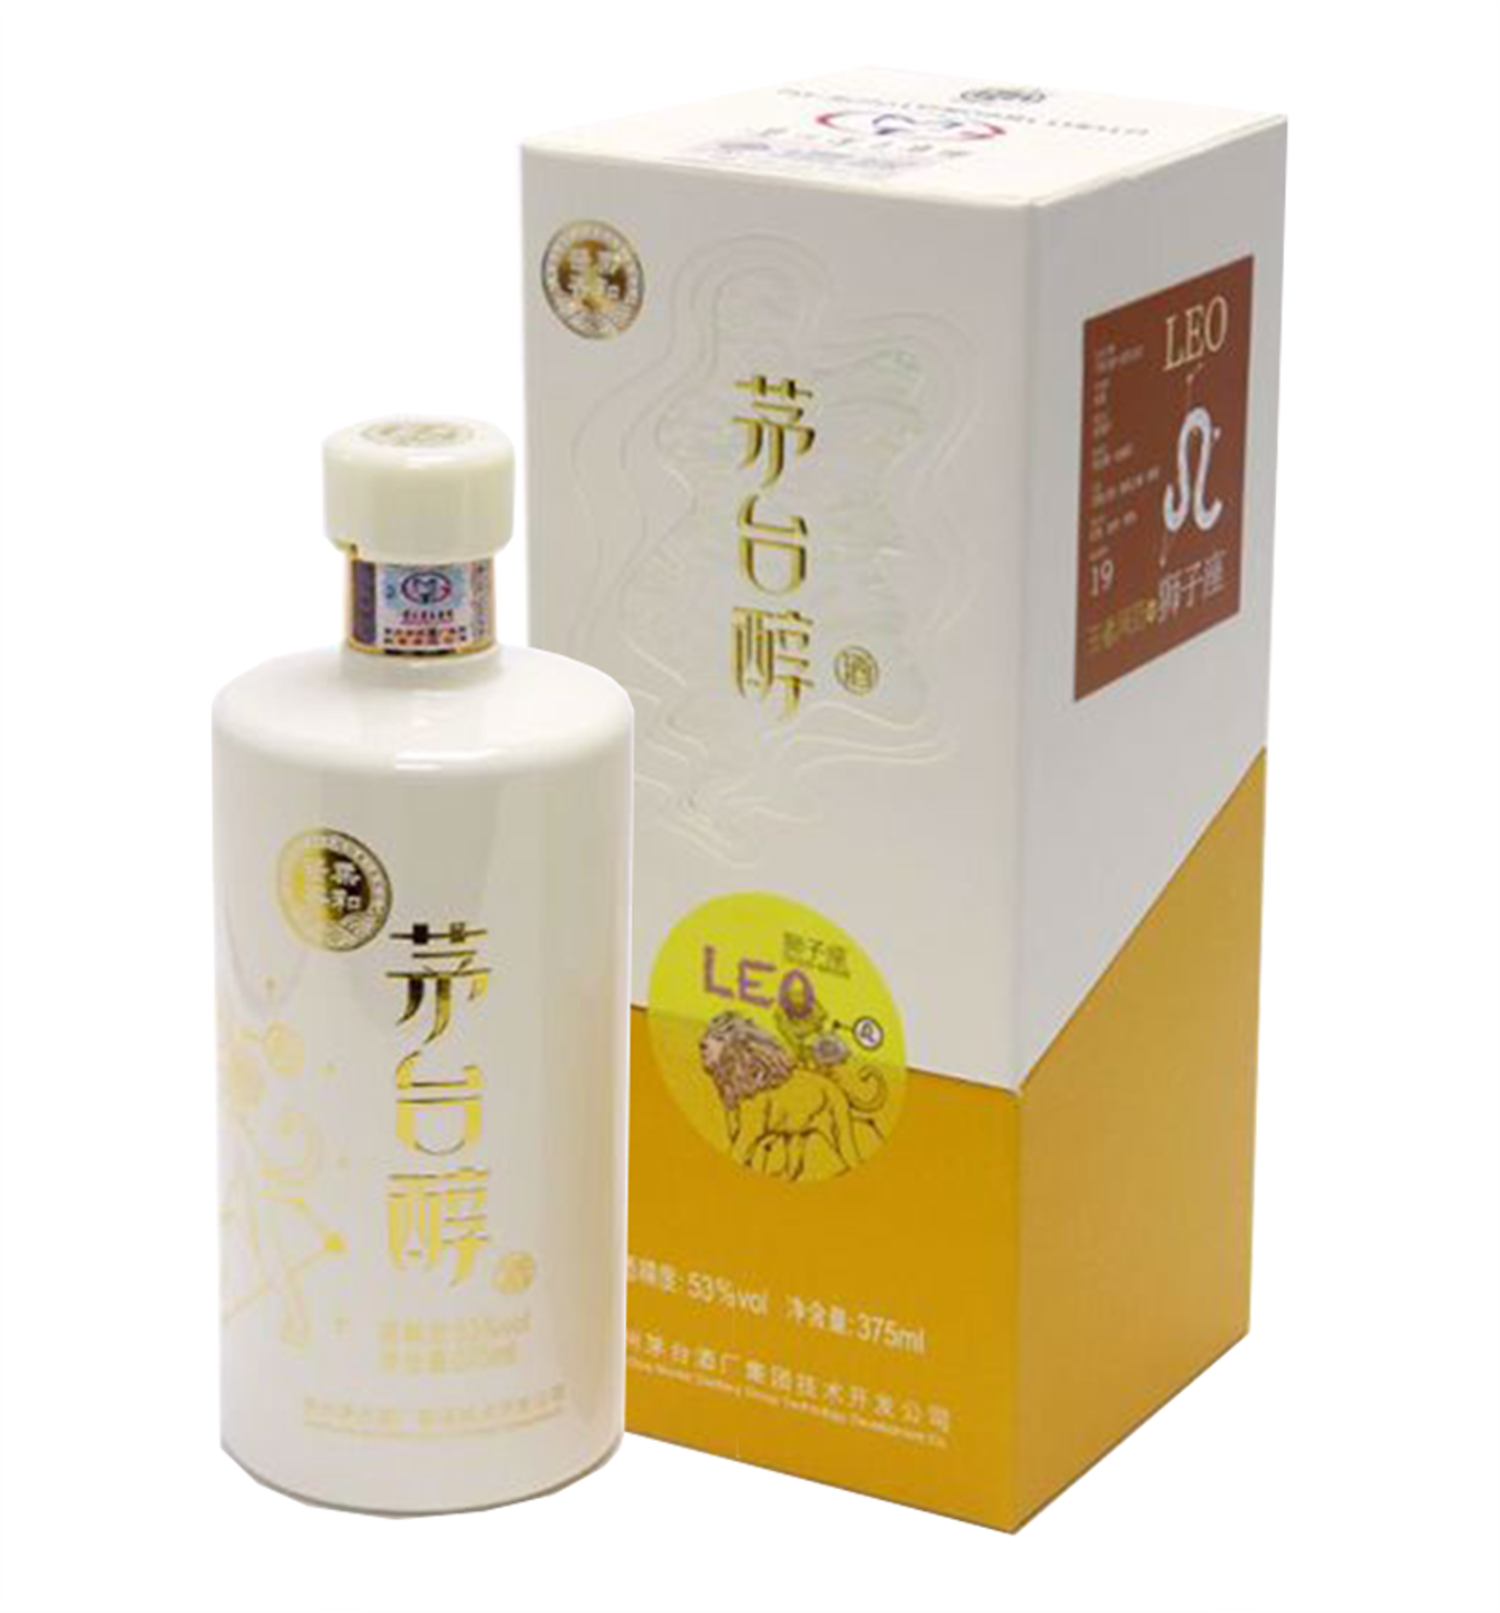 Moutai Chun Leo 茅台醇狮子座375ml $65 FREE DELIVERY - Uncle Fossil 